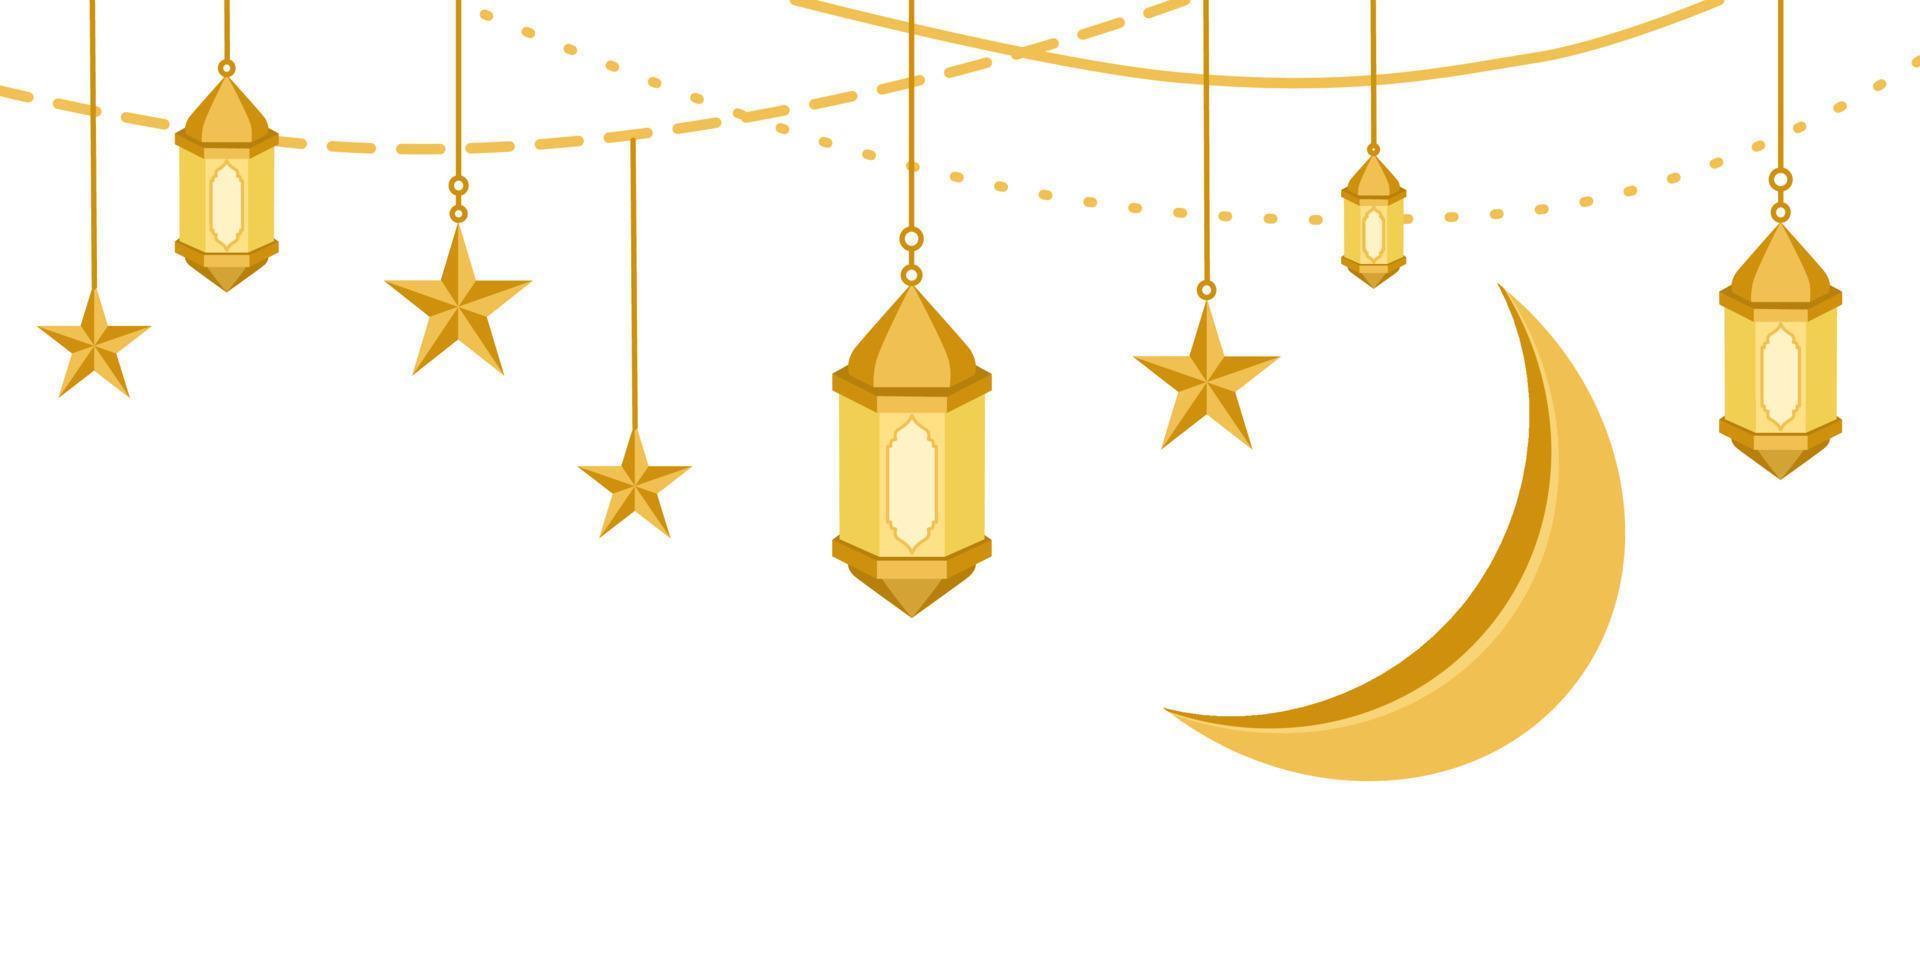 Hanging Golden Lantern, Moon, and Star for Islamic Decoration Isolated on White Background. Luxury Ramadan Element Decoration vector